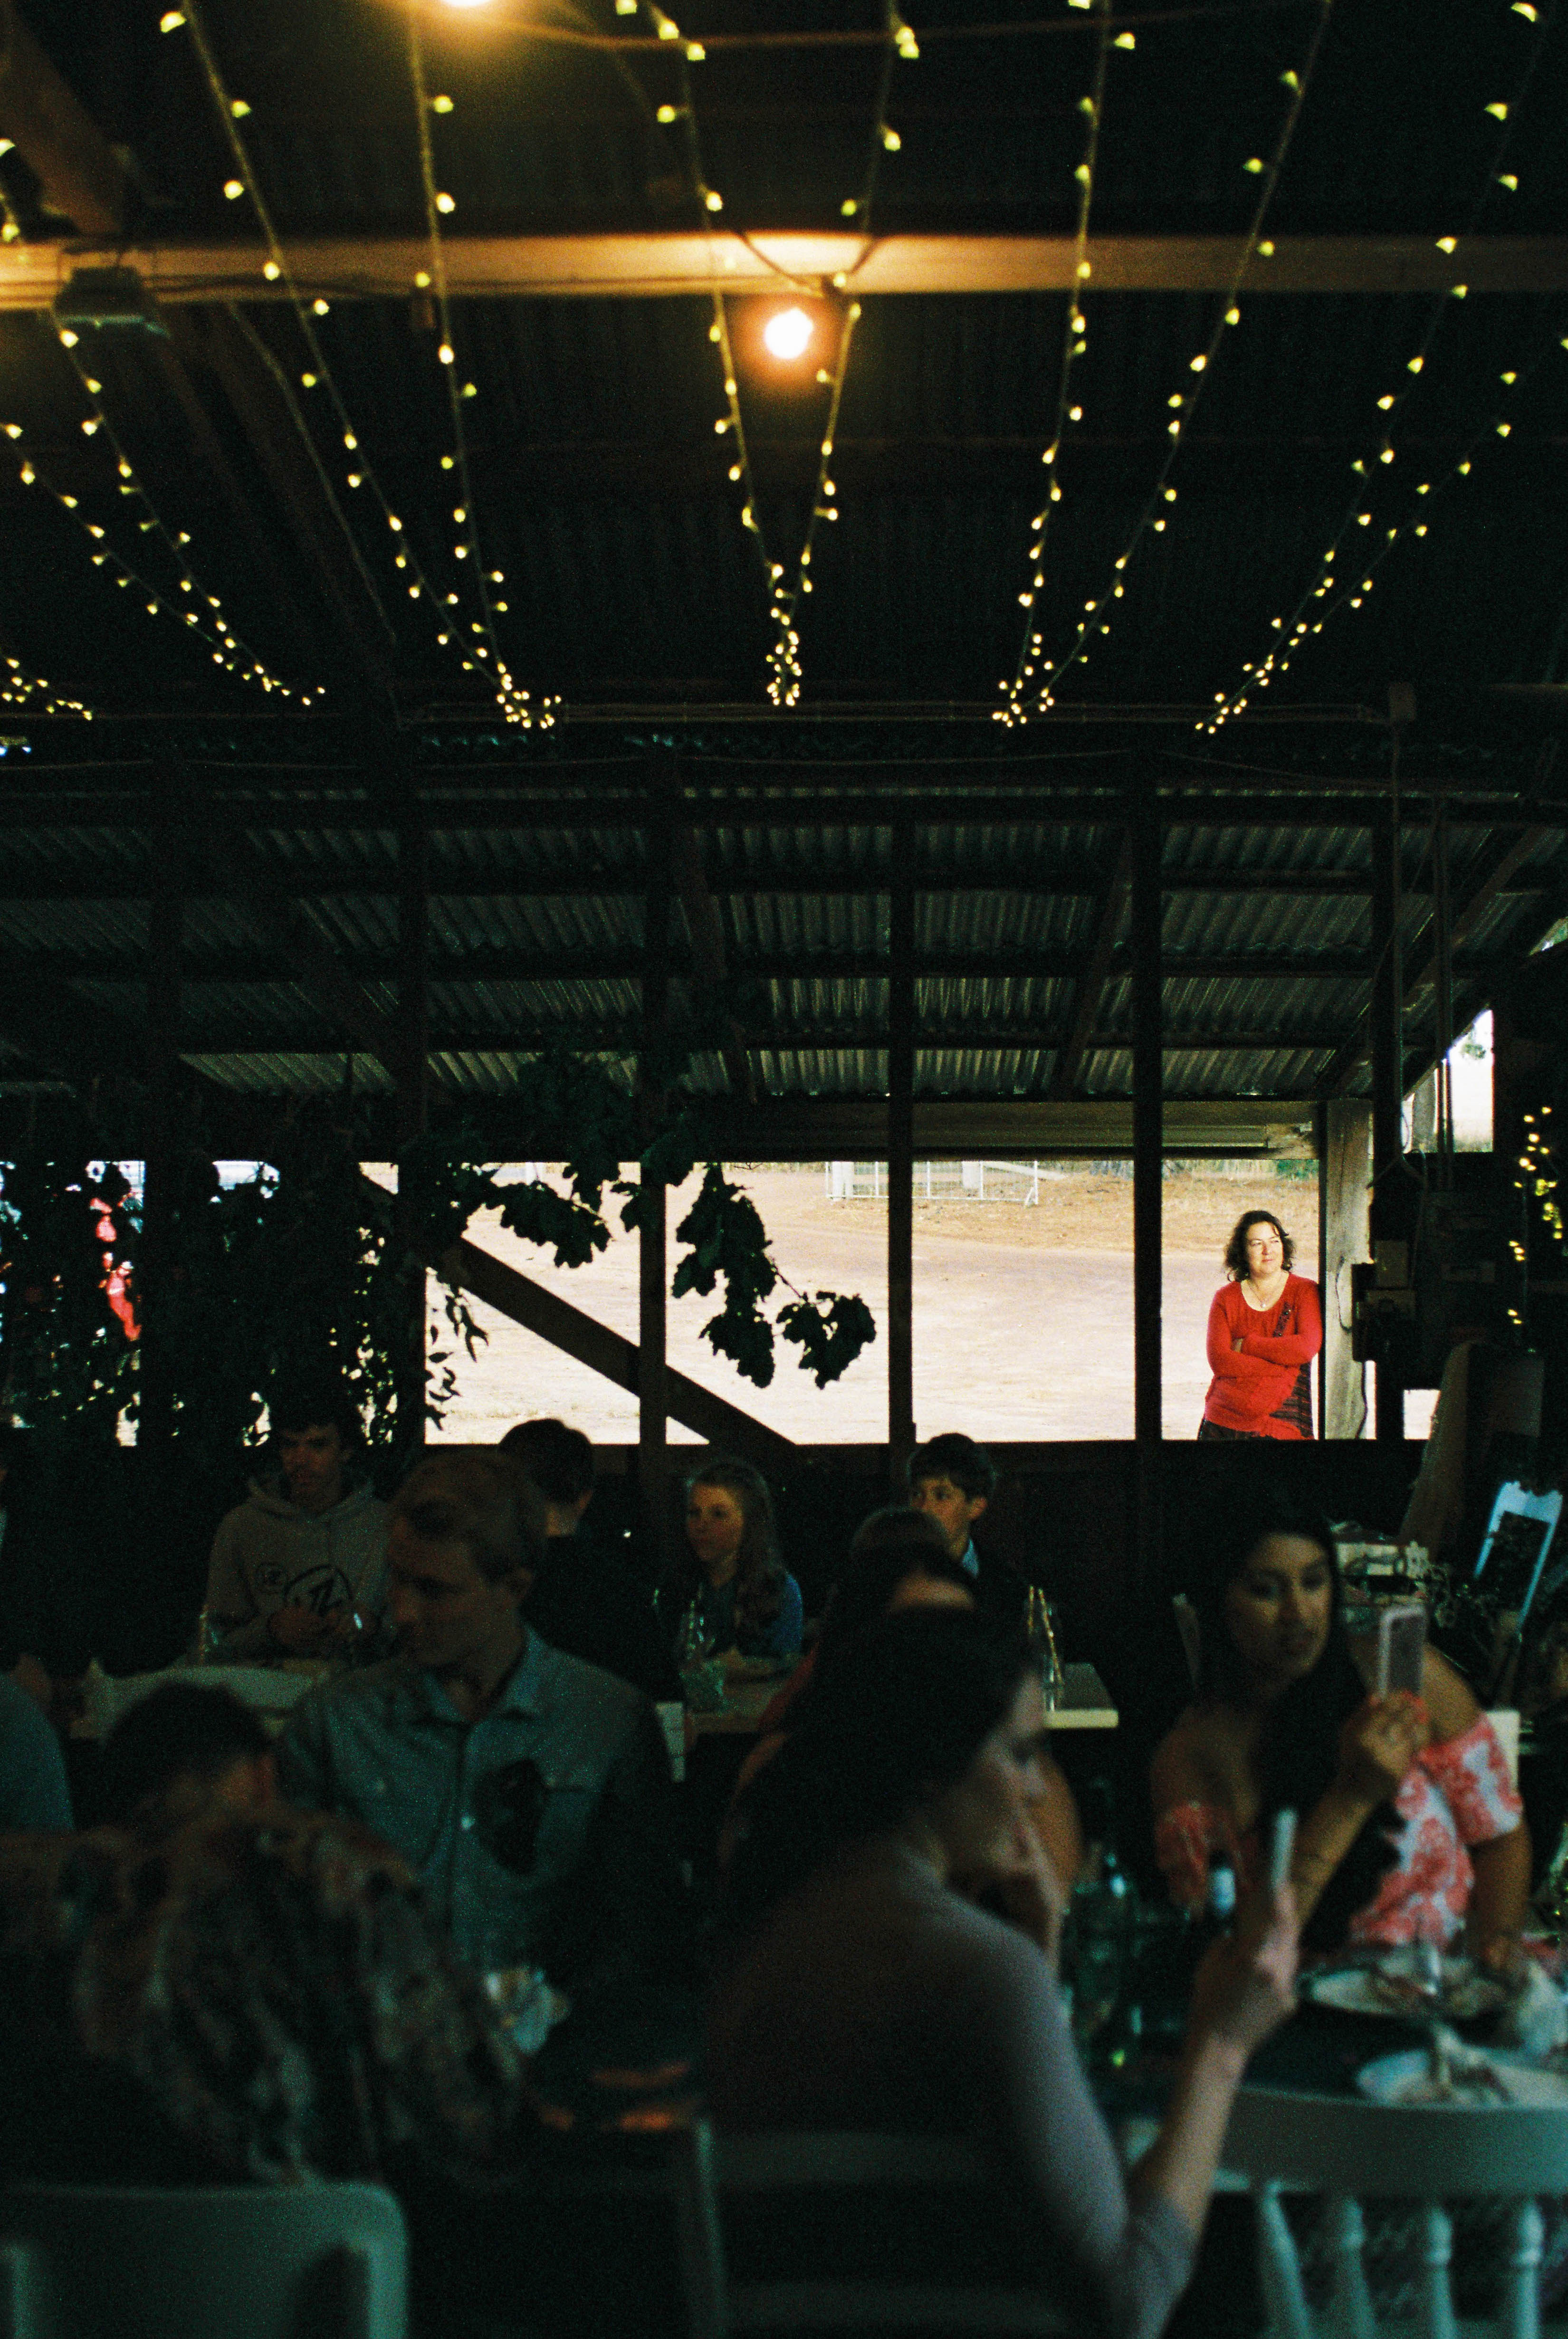 A striking wedding photo of a guest watching on from outside during a shearing shed wedding reception